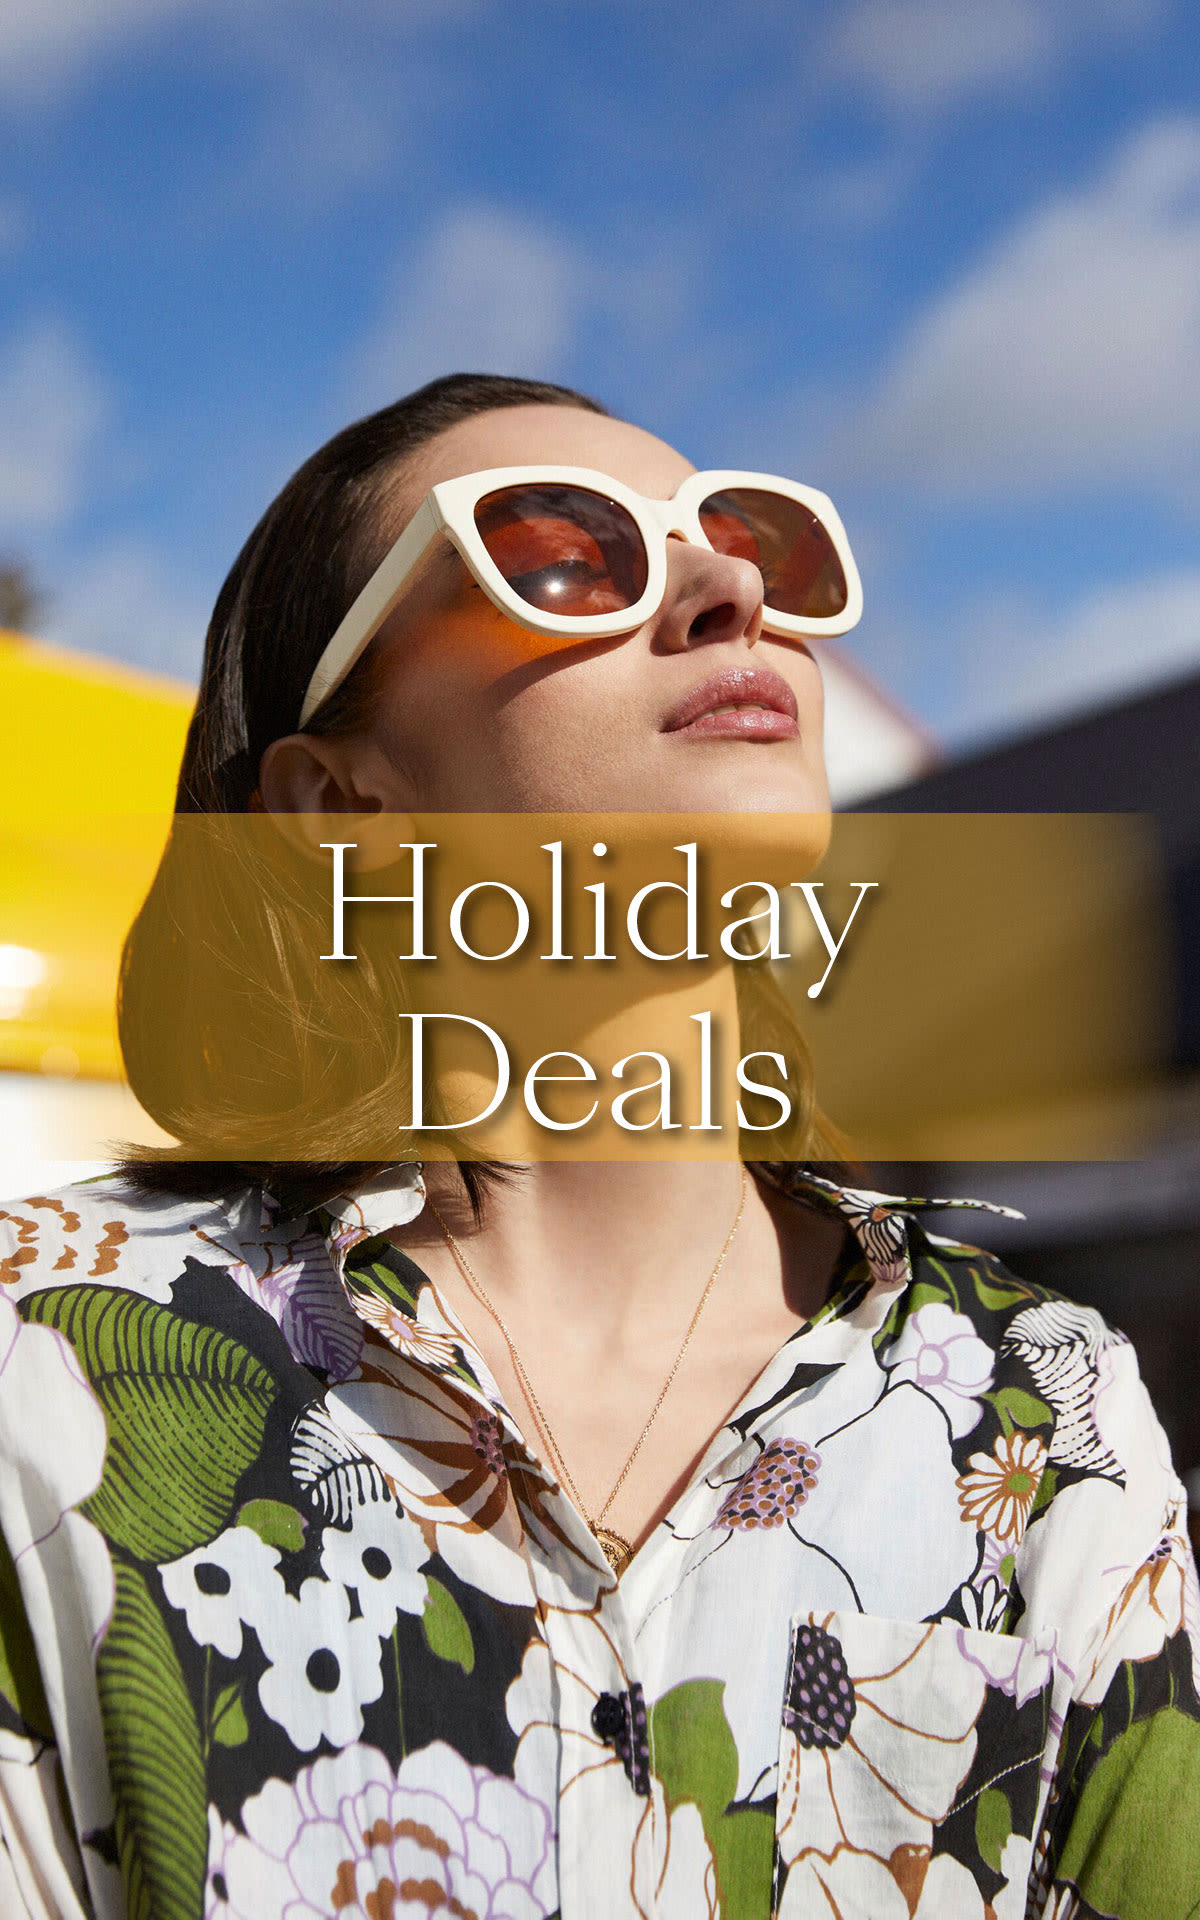 Shop our amazing Holiday Deals